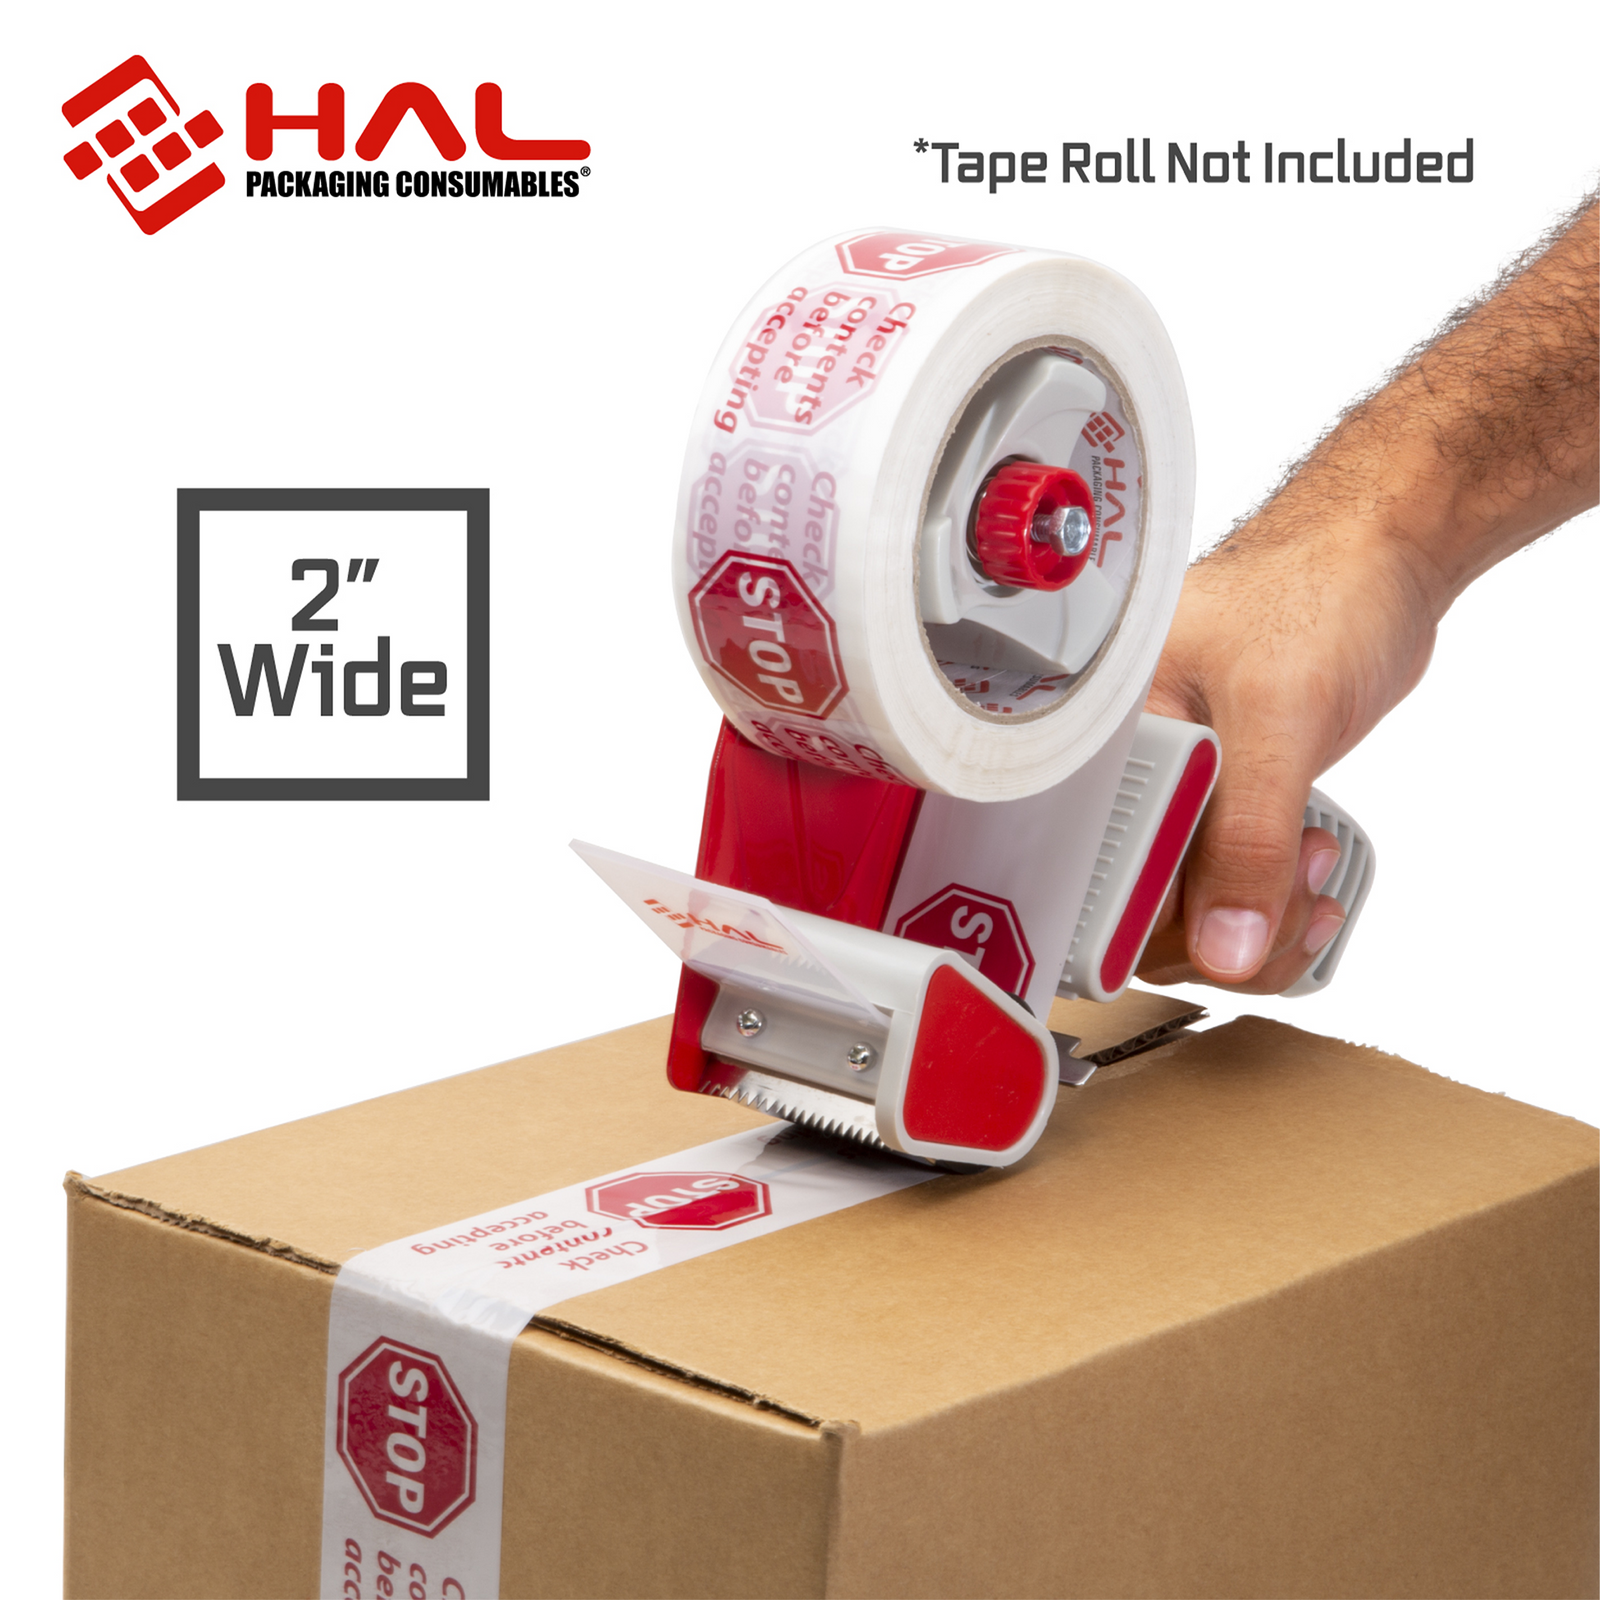 man closing box with red and white tape dispenser using white tape with stop sign and red HAL logo. grey box graphic with text: 2